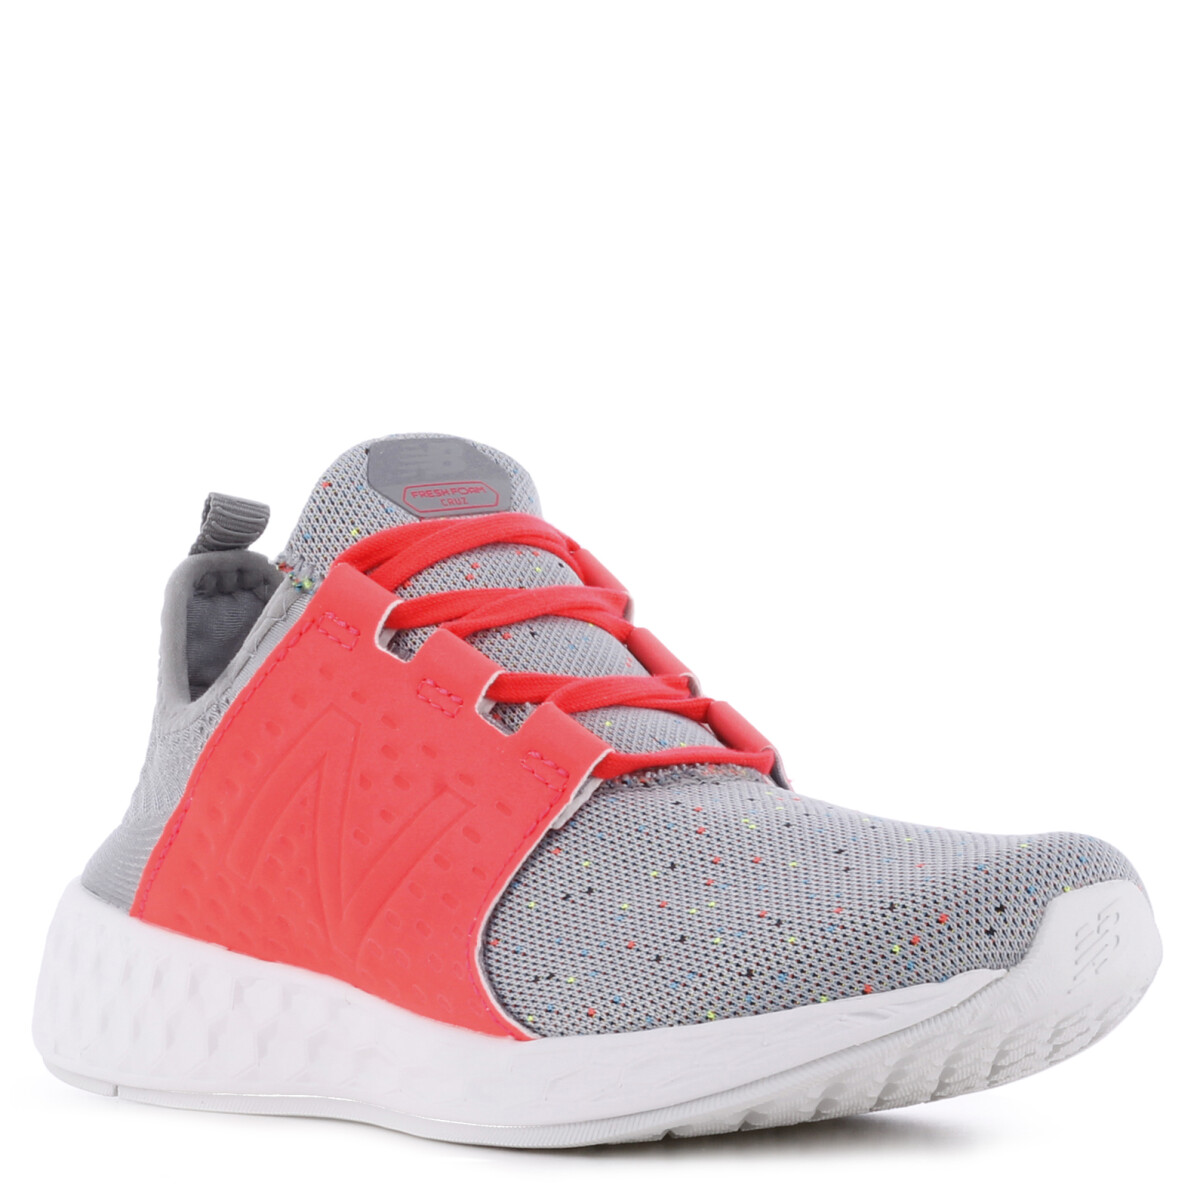 Running Course New Balance - Gris/Coral 